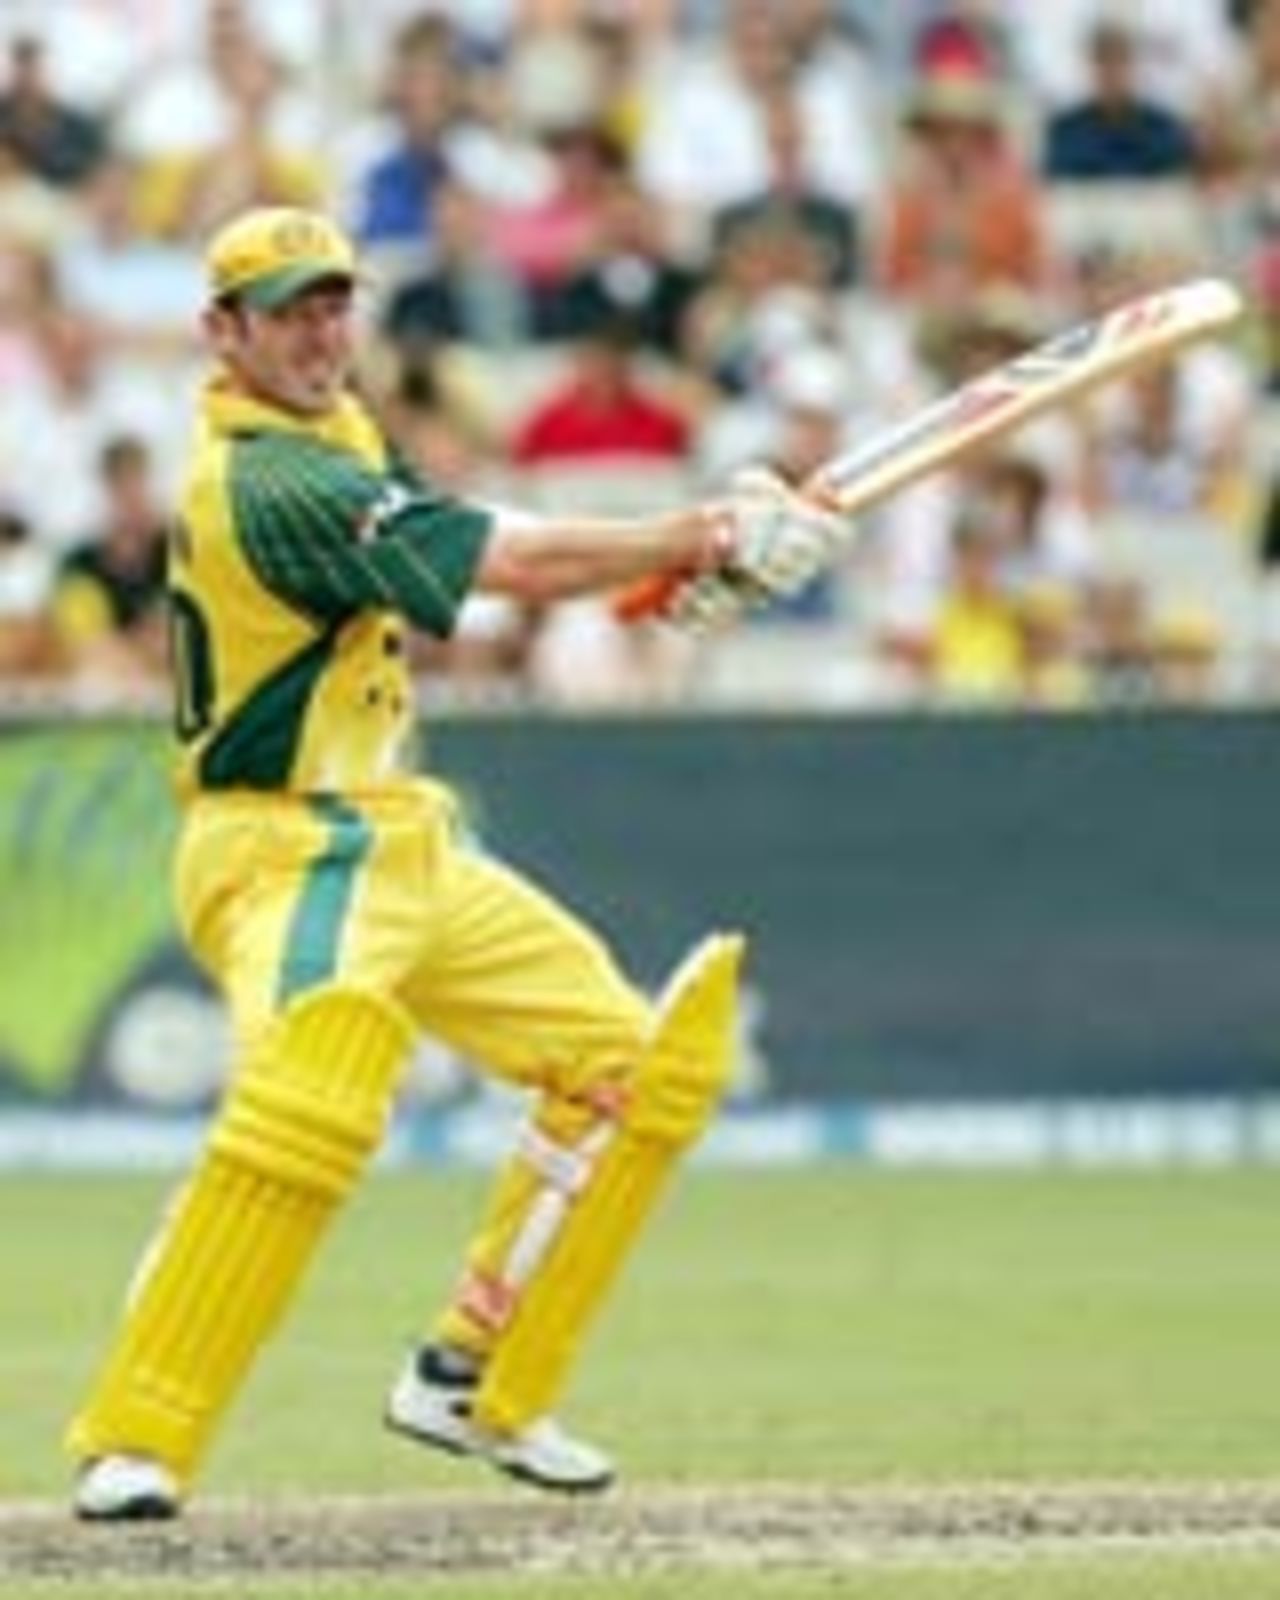 Damien Martyn plays the cut en route to his unbeaten 95, Australia v West Indies, 1st match, VB Series, January 14, 2005